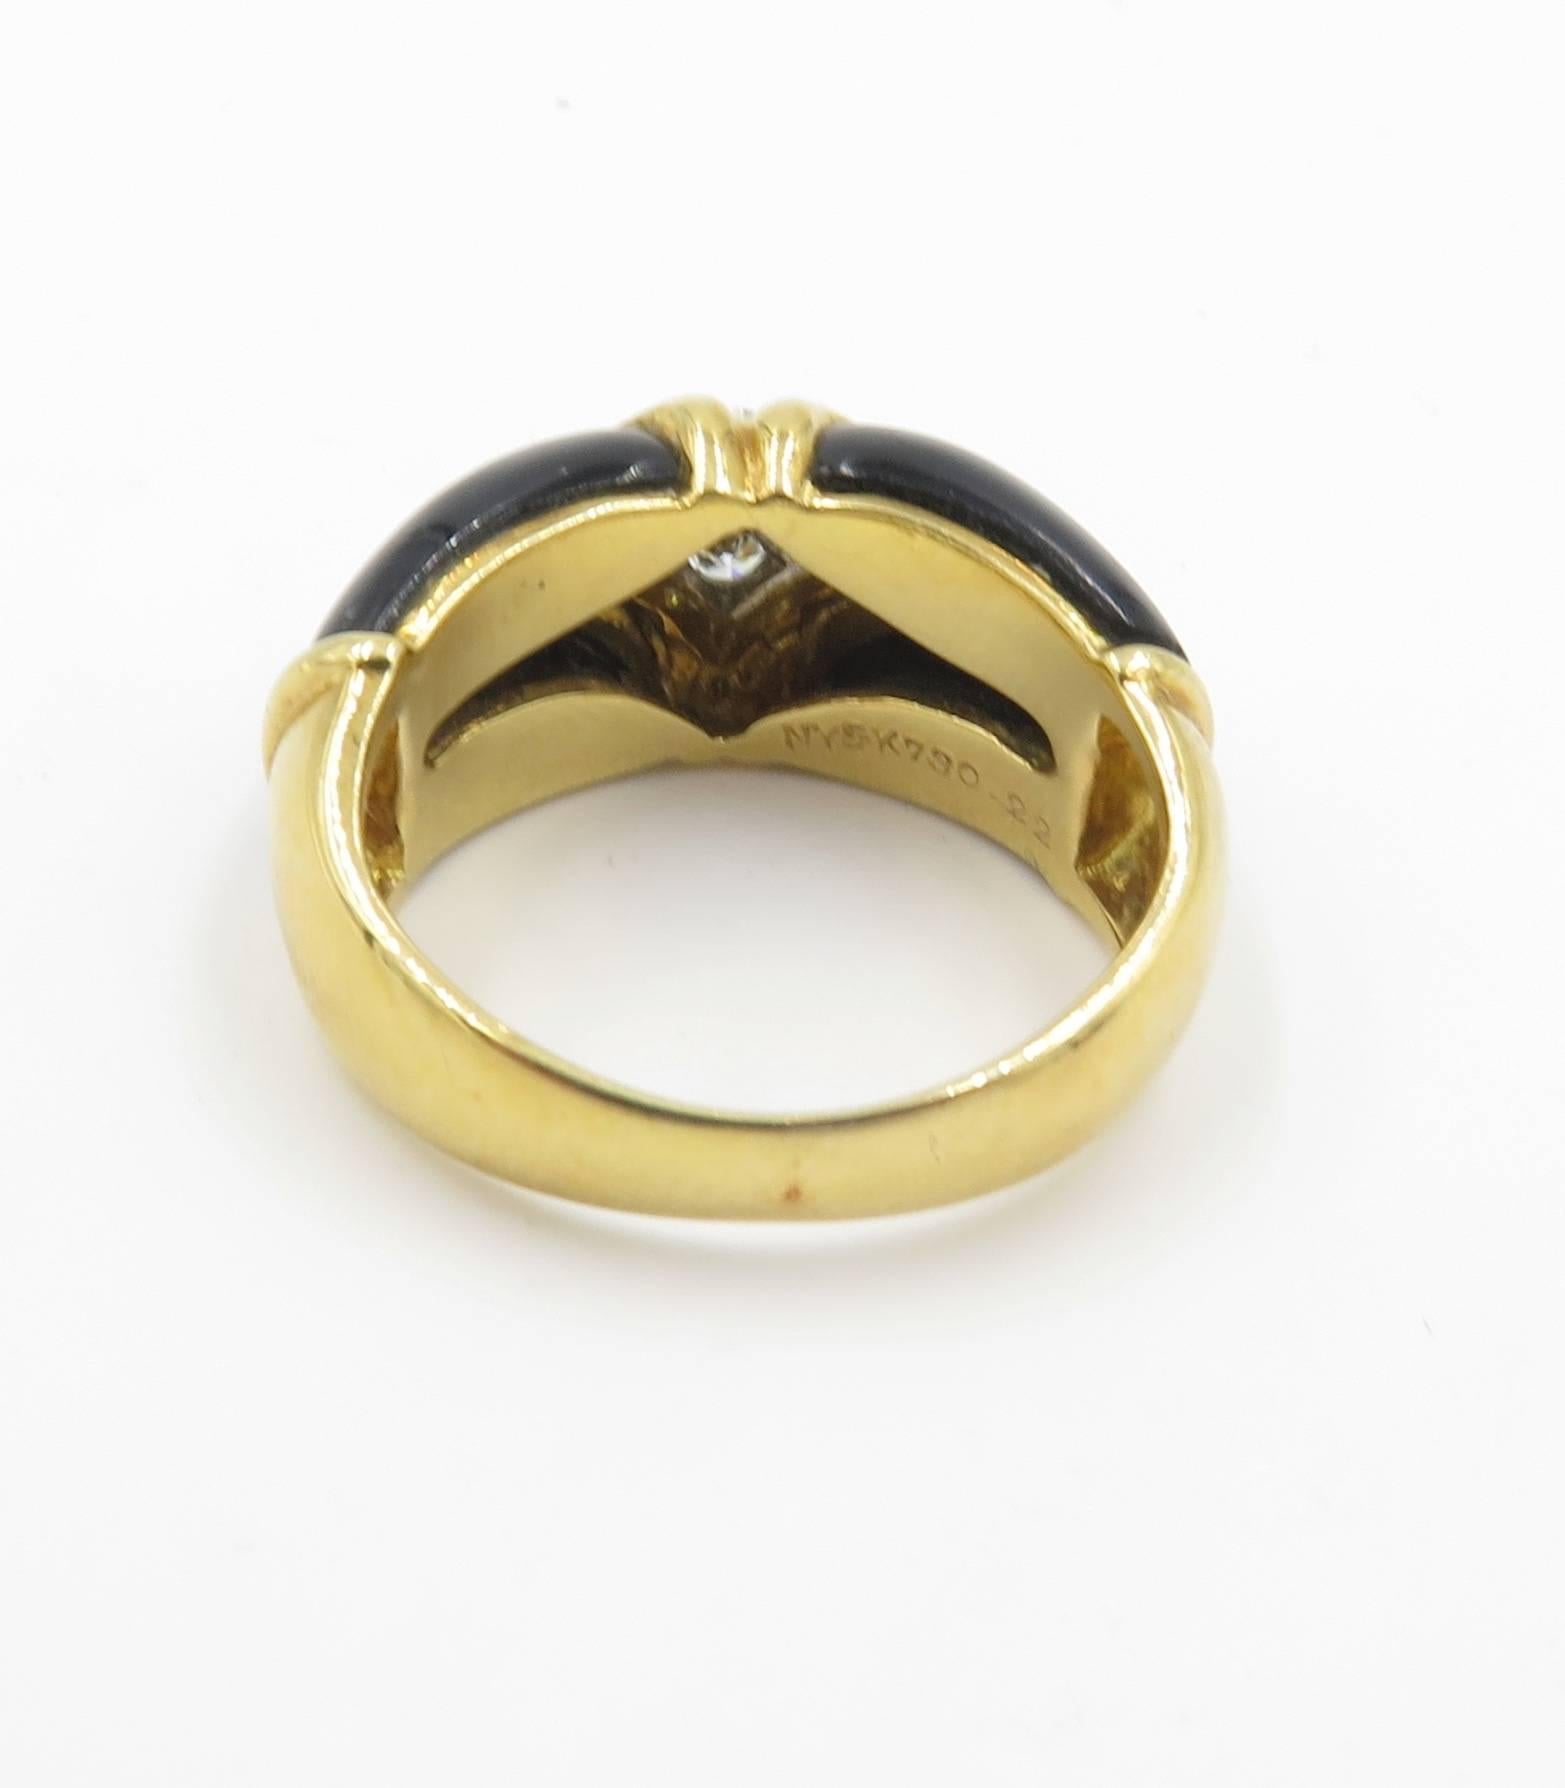 An 18 karat yellow gold, black onyx and diamond ring.  Van Cleef & Arpels.  Of bombe' design, set with onyx, centering a navette-shaped pave' diamond panel, enhanced by polished gold lines.  Four (4) diamonds weigh approximately.  Signed V.C.A. 18K.